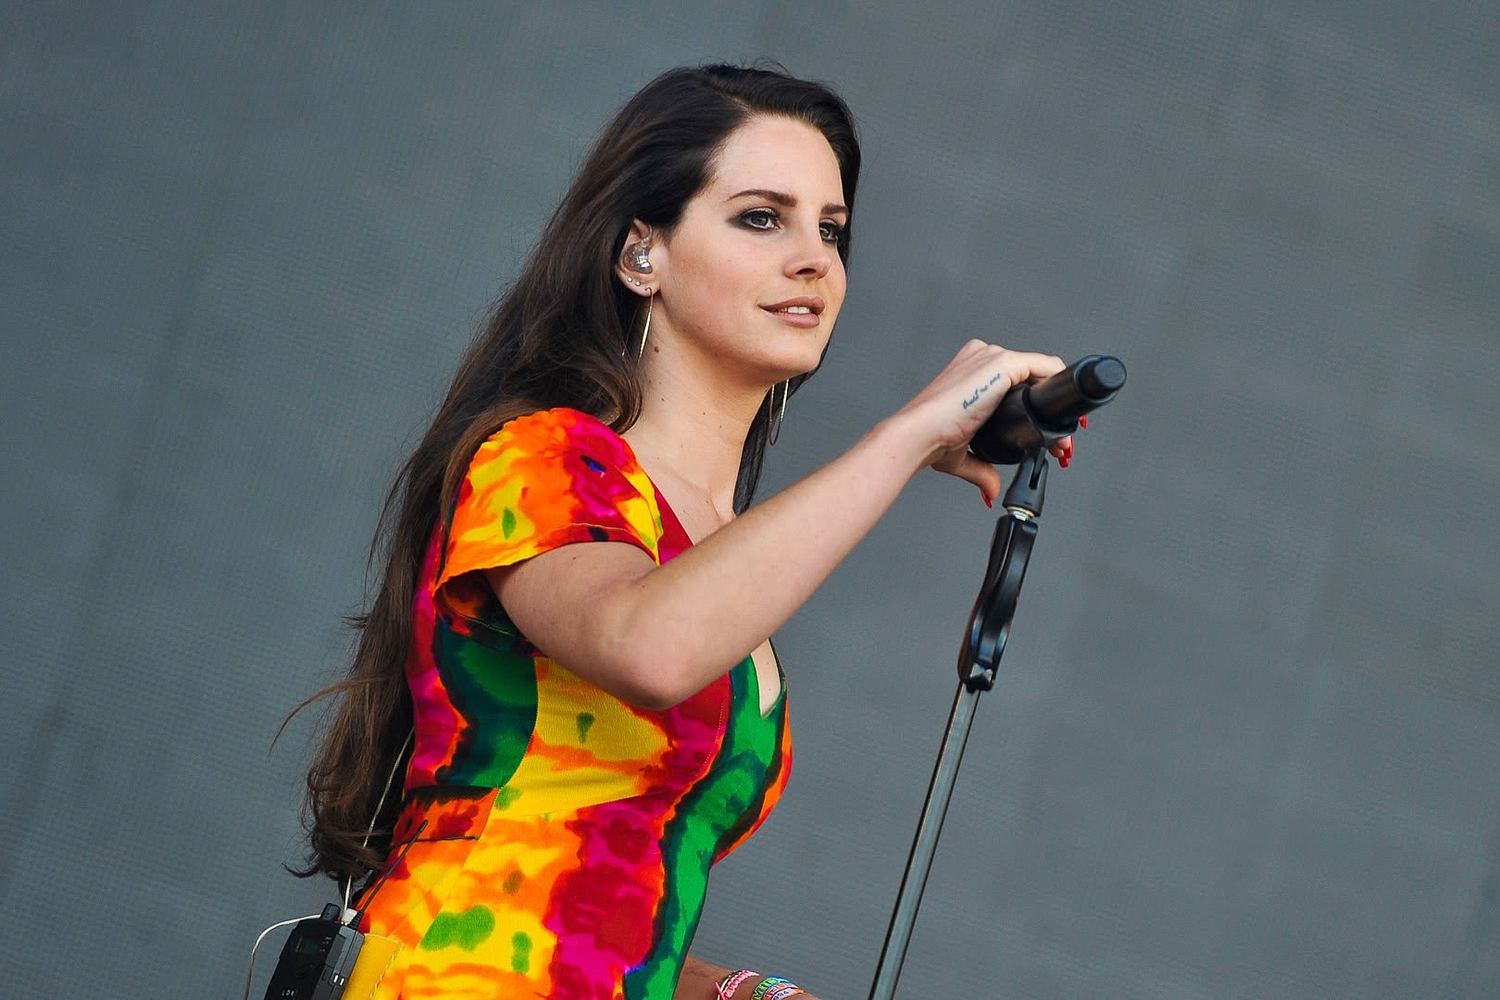 Lana Del Rey, Skepta and more announced for Lollapalooza Paris